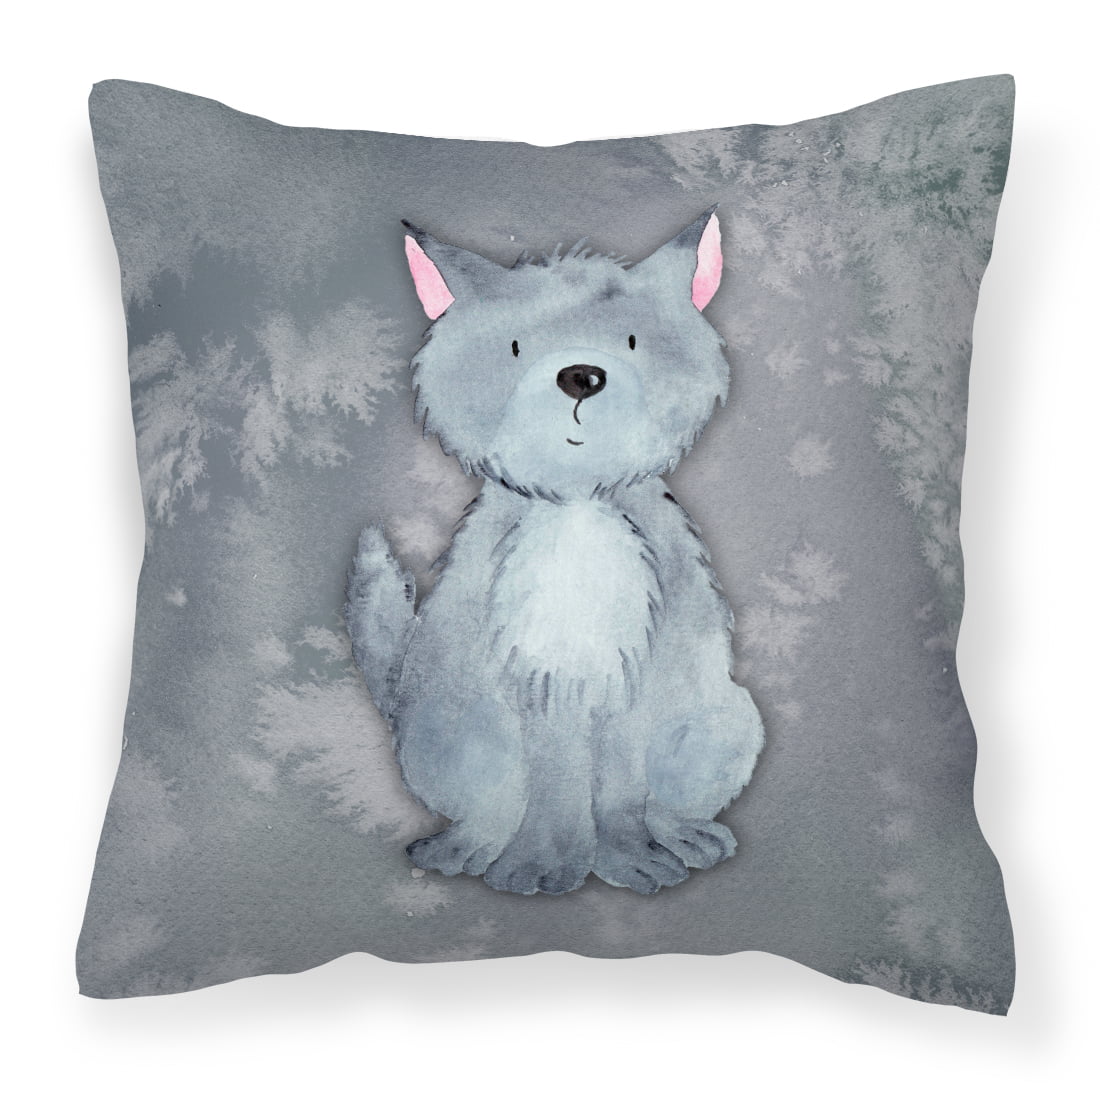 REDUCED Wolf Pillow Cover Sham 18" x 18" Watercolor Throw Couch Sofa Decorative 